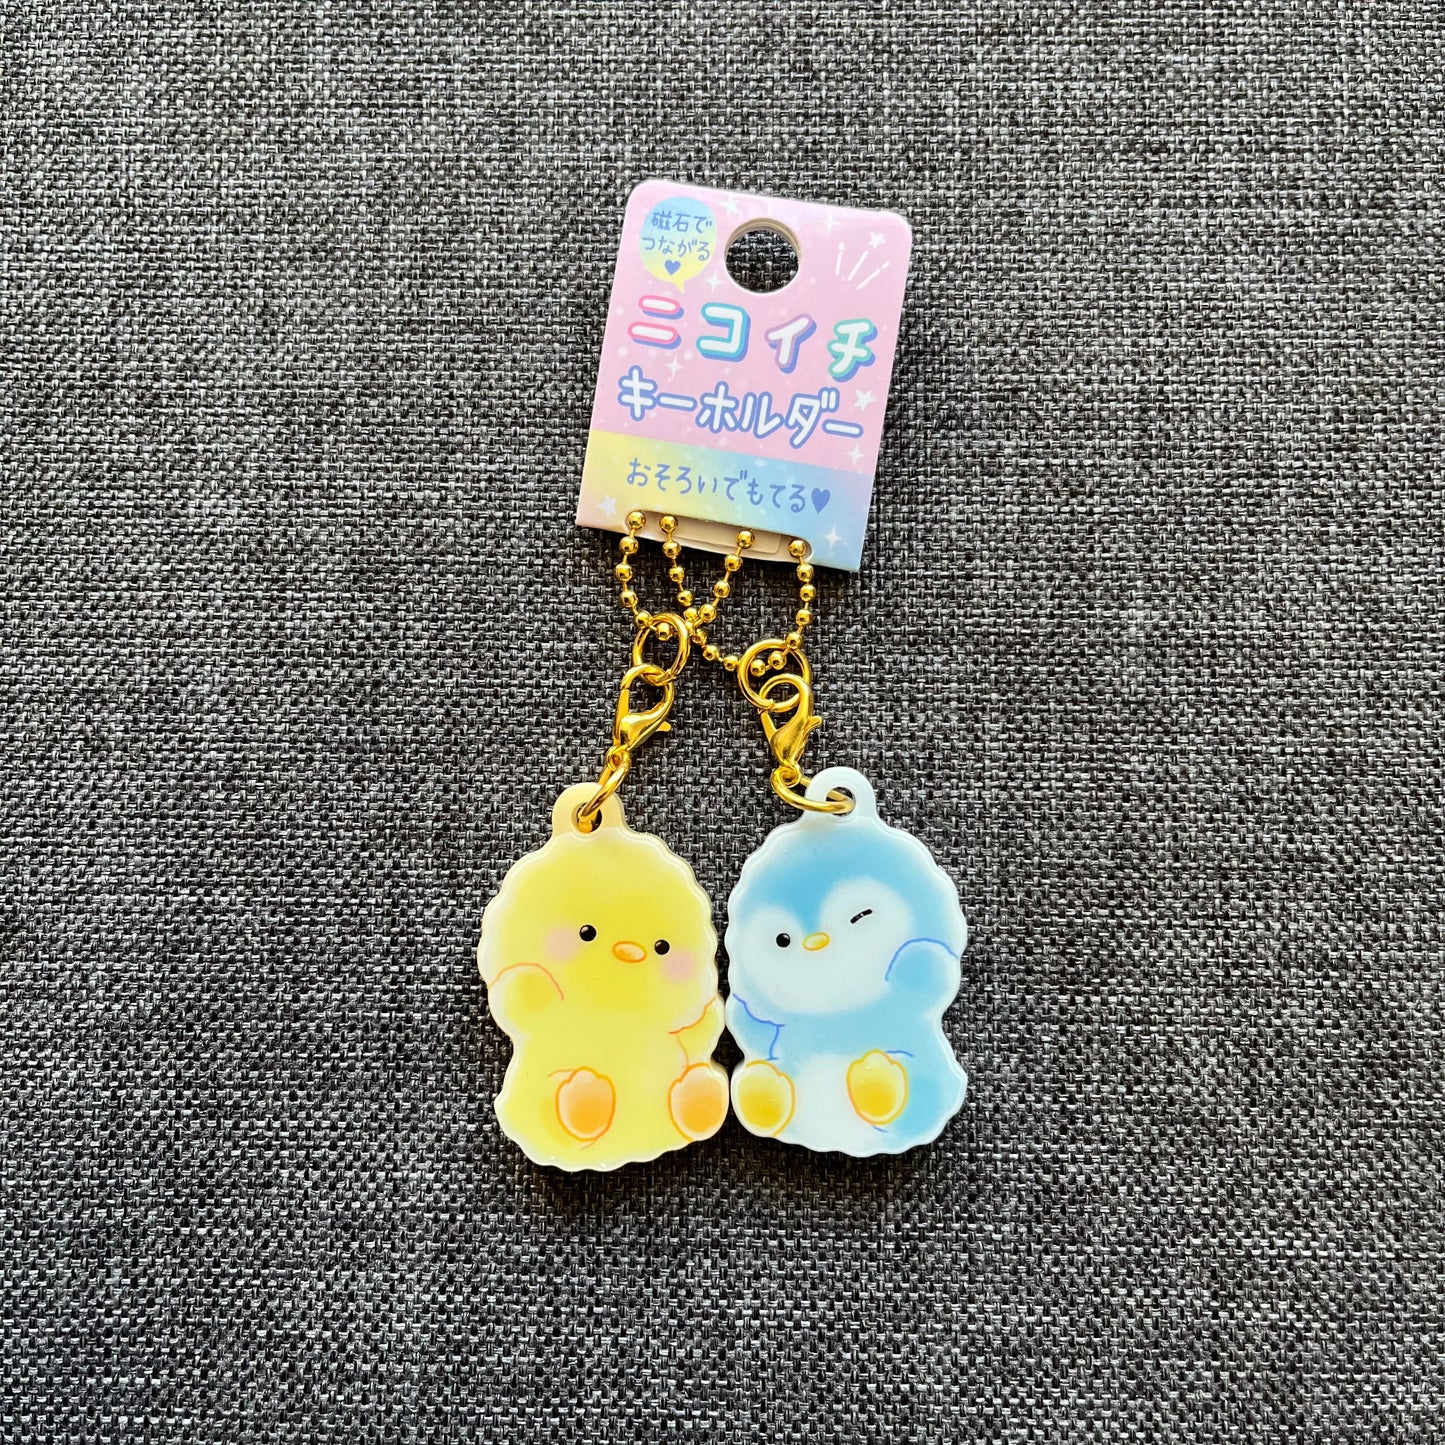 Chick / Bird and Penguin Magnetic Friendship Charms